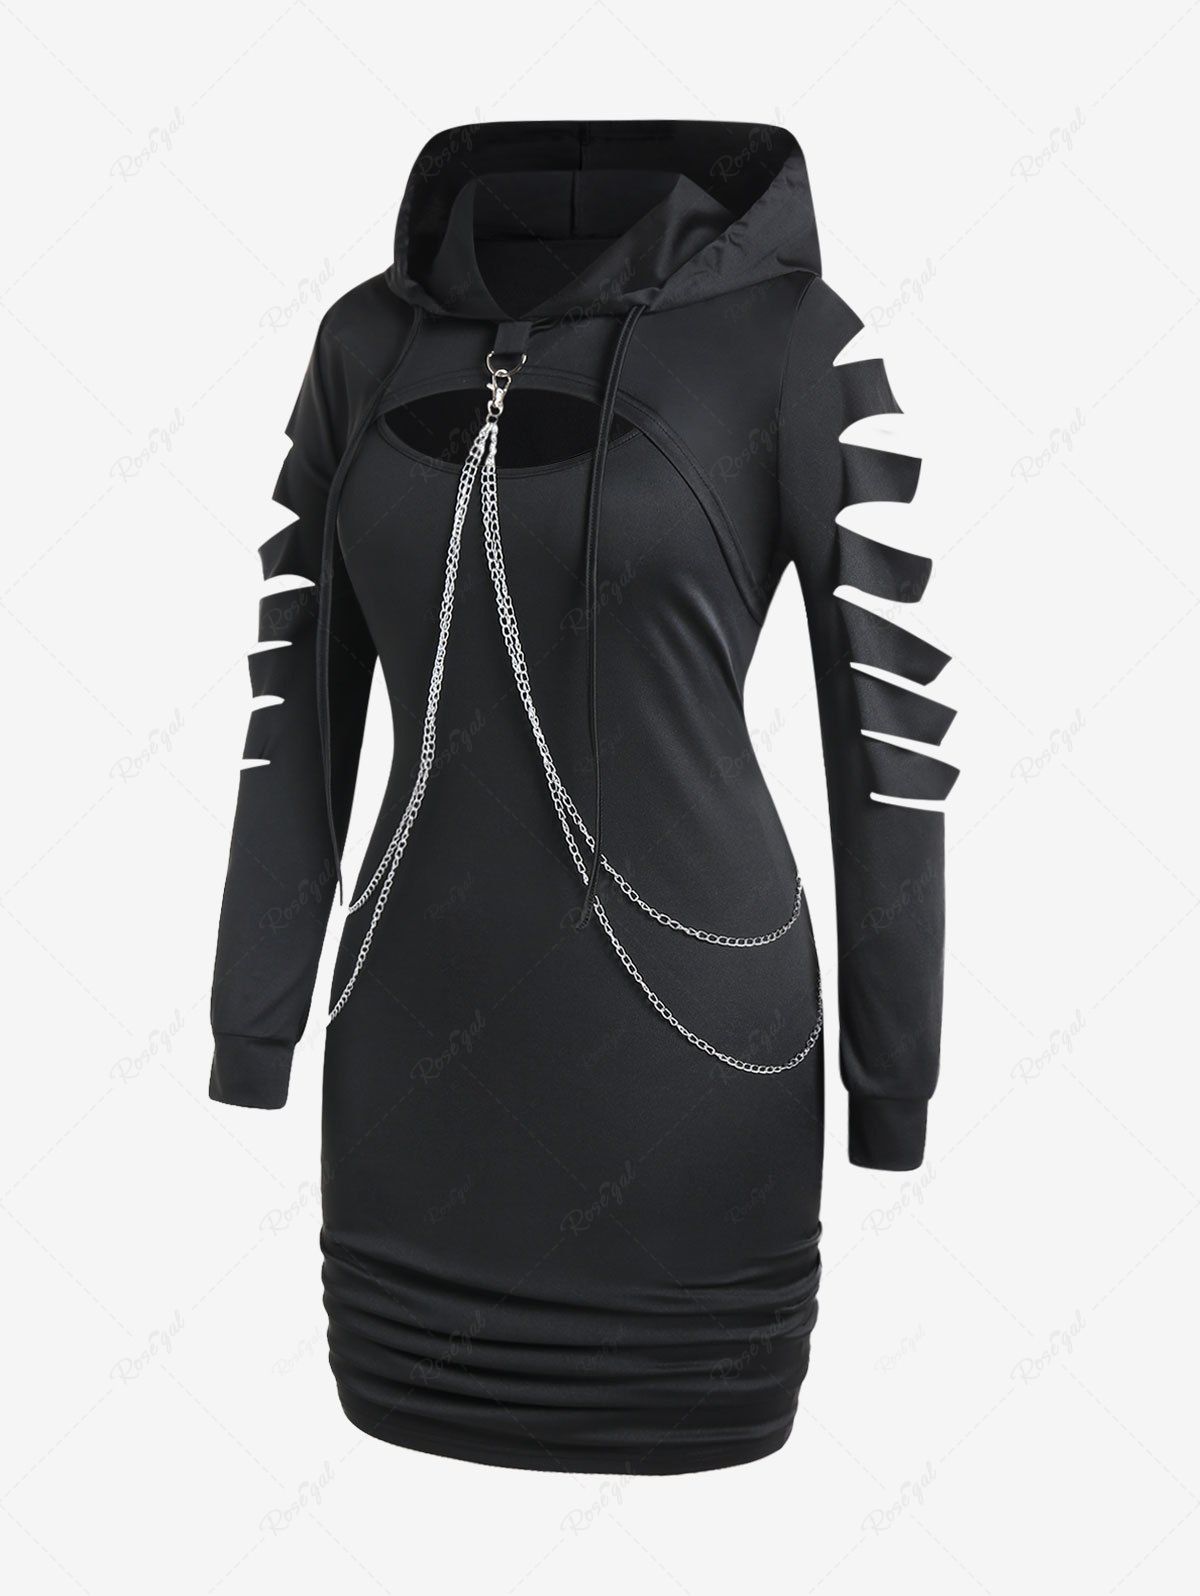 Gothic Chains Ladder Ripped Hooded Shrug Top and Bodycon Tank Dress Set